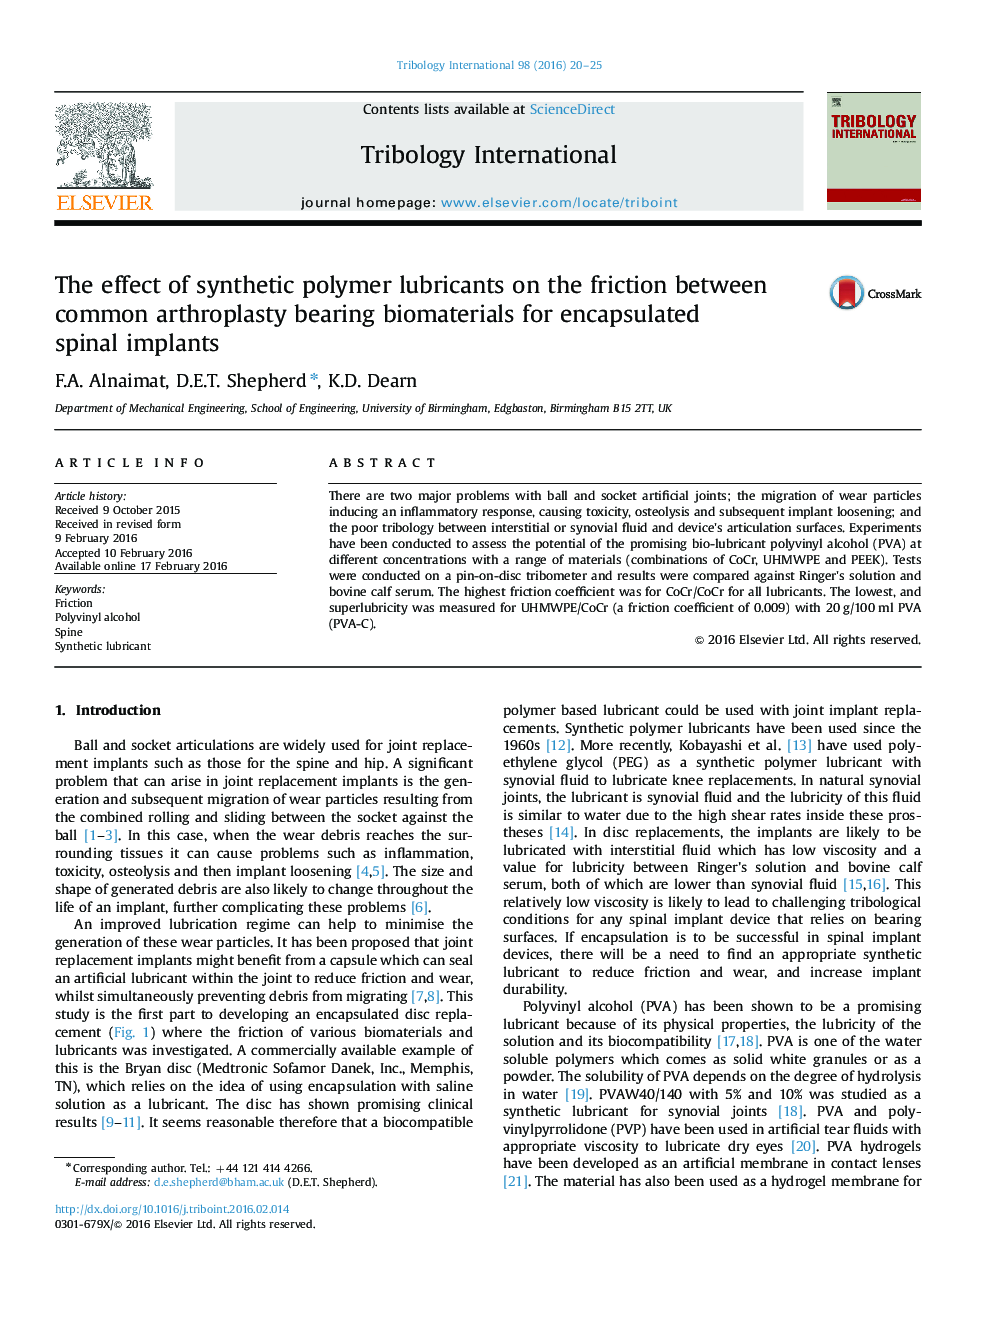 The effect of synthetic polymer lubricants on the friction between common arthroplasty bearing biomaterials for encapsulated spinal implants